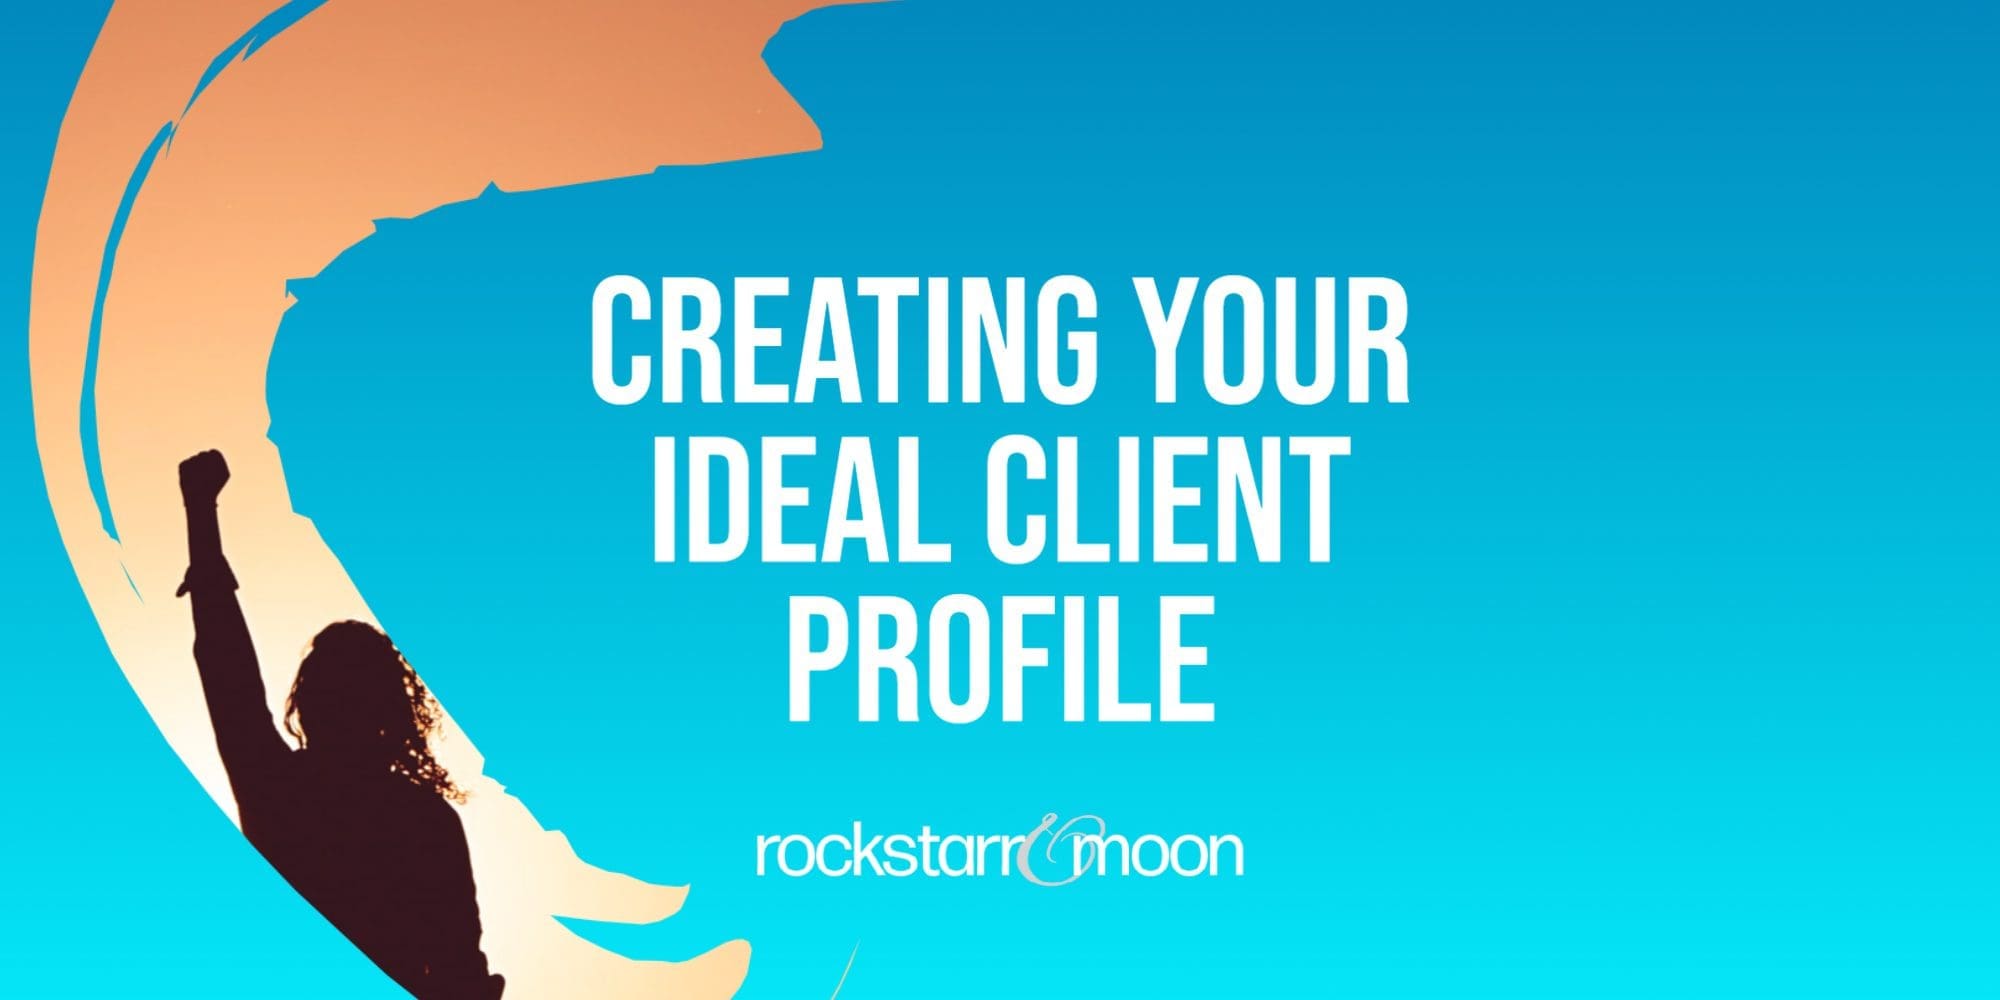 Creating Your Ideal Client Profile